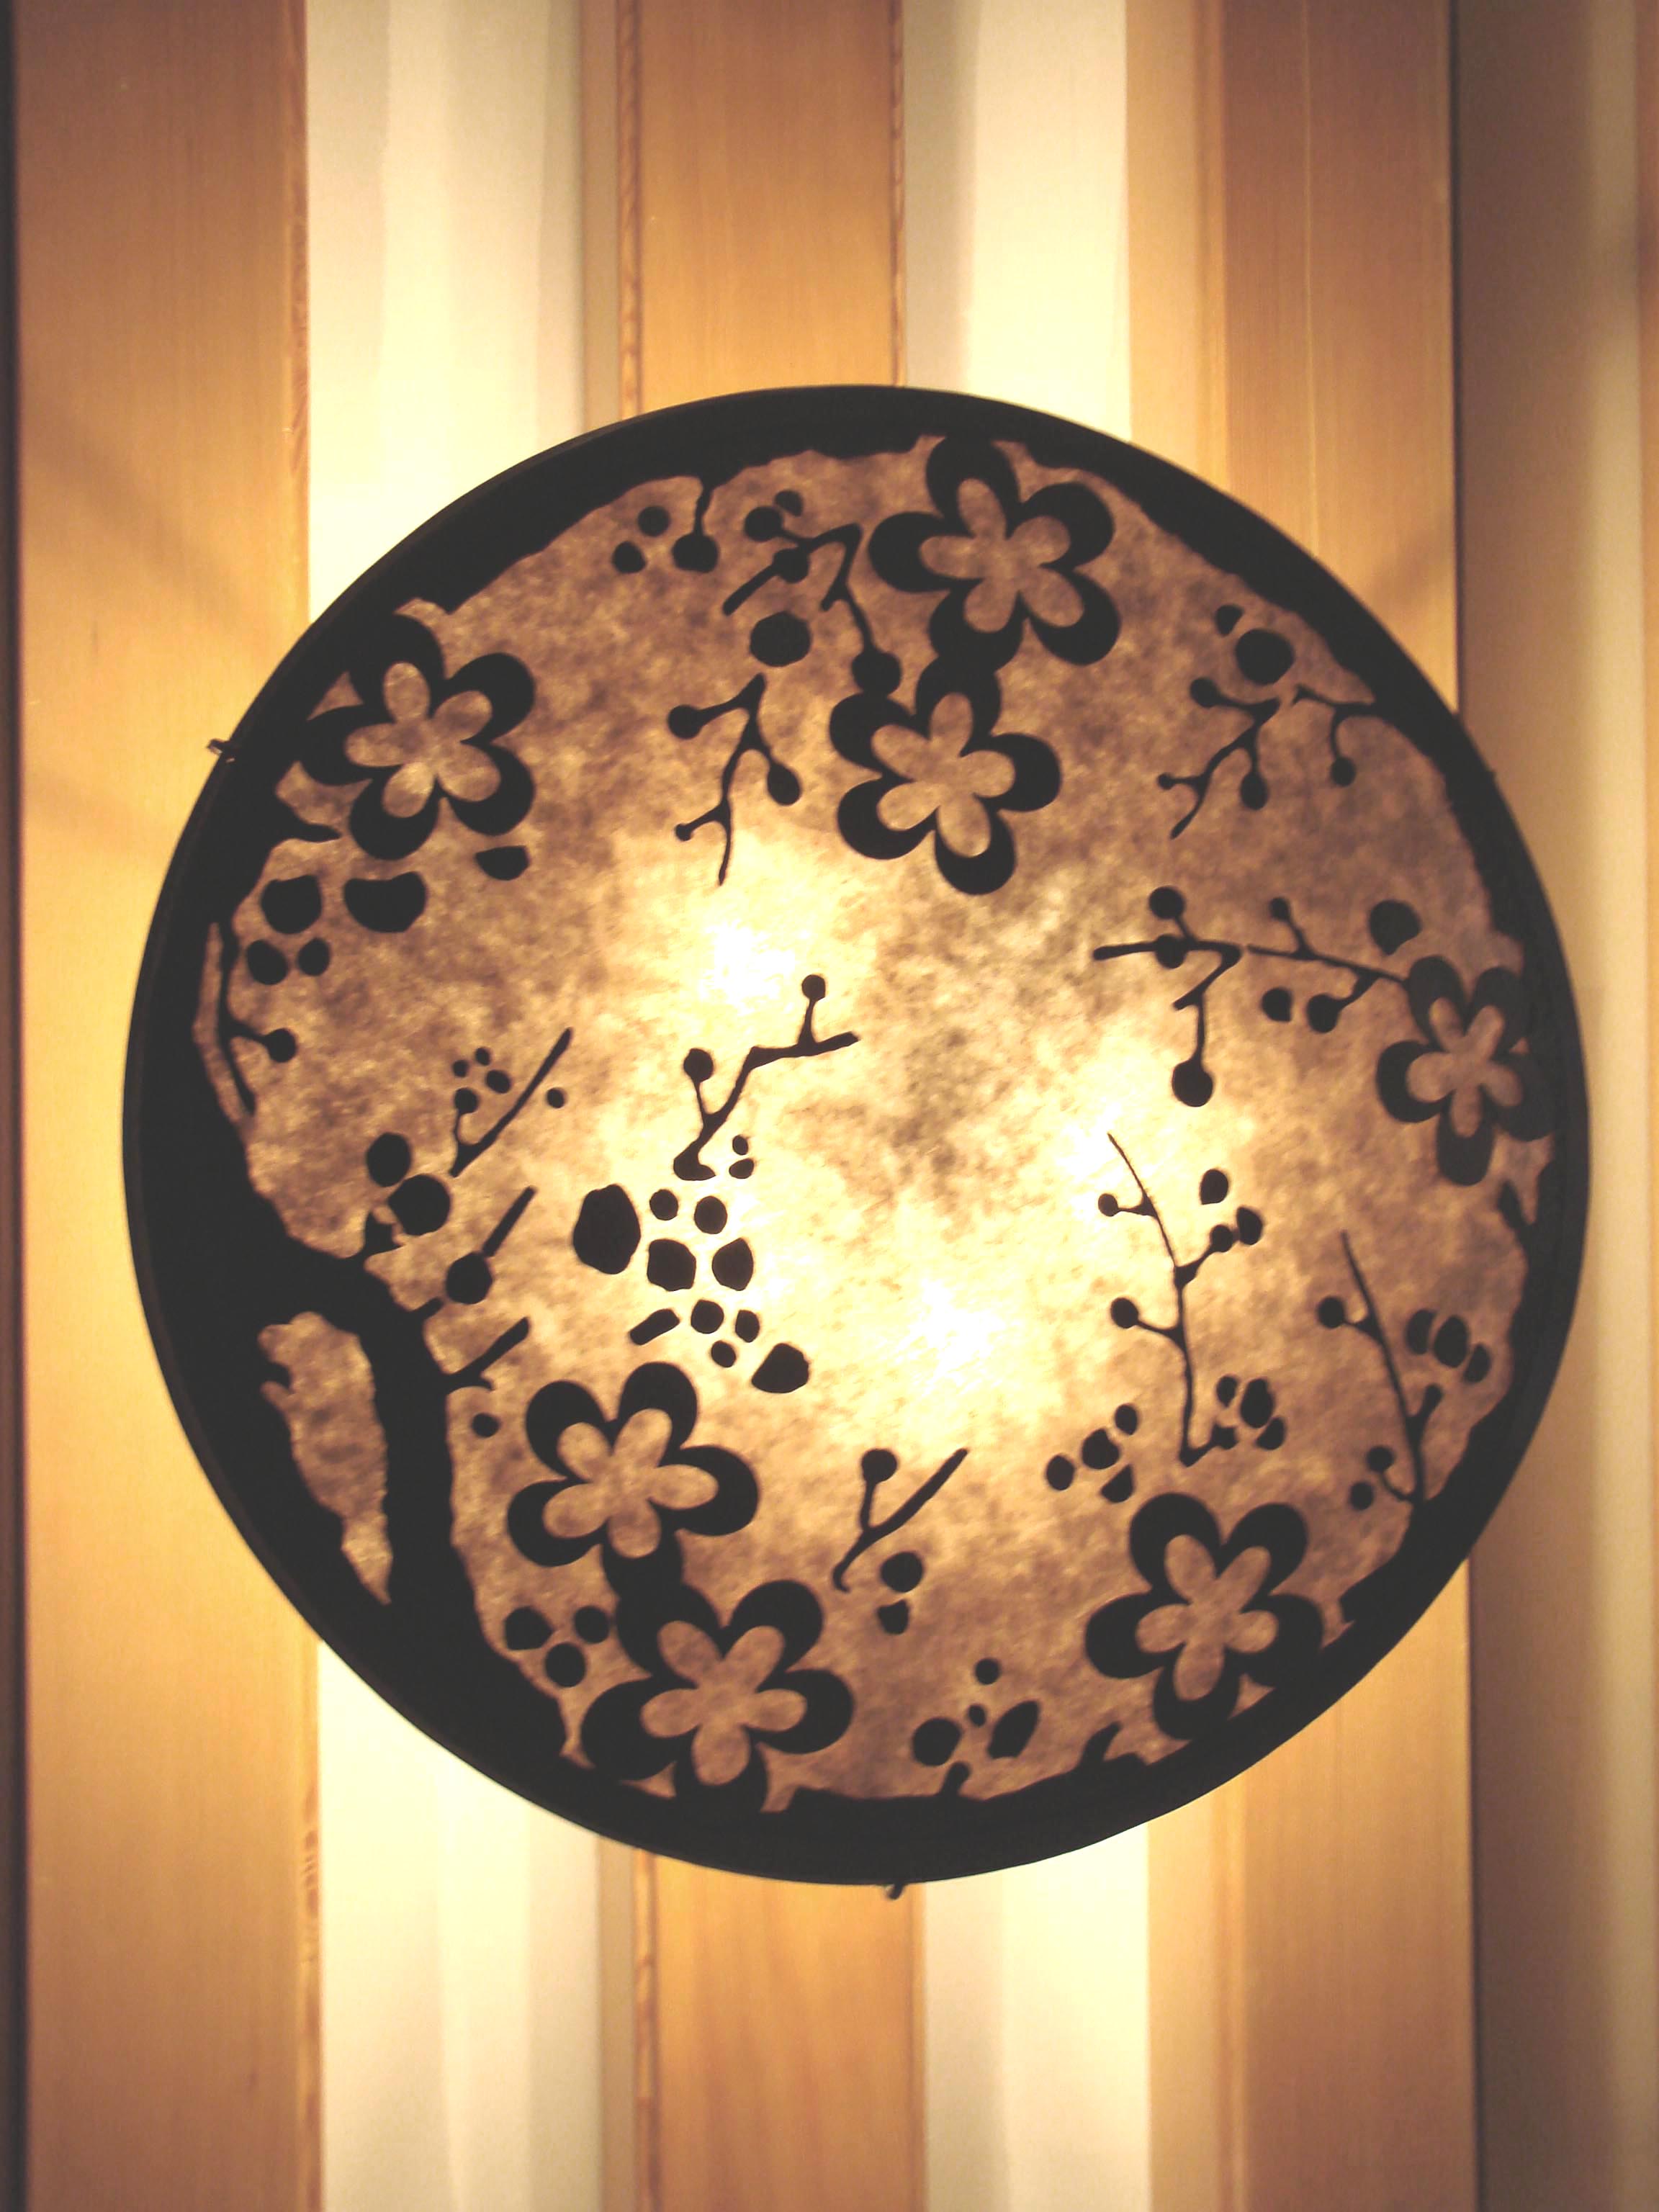 Private residence Colorado Springs 30 in diameter bowl fixture with mica fill behind the detail